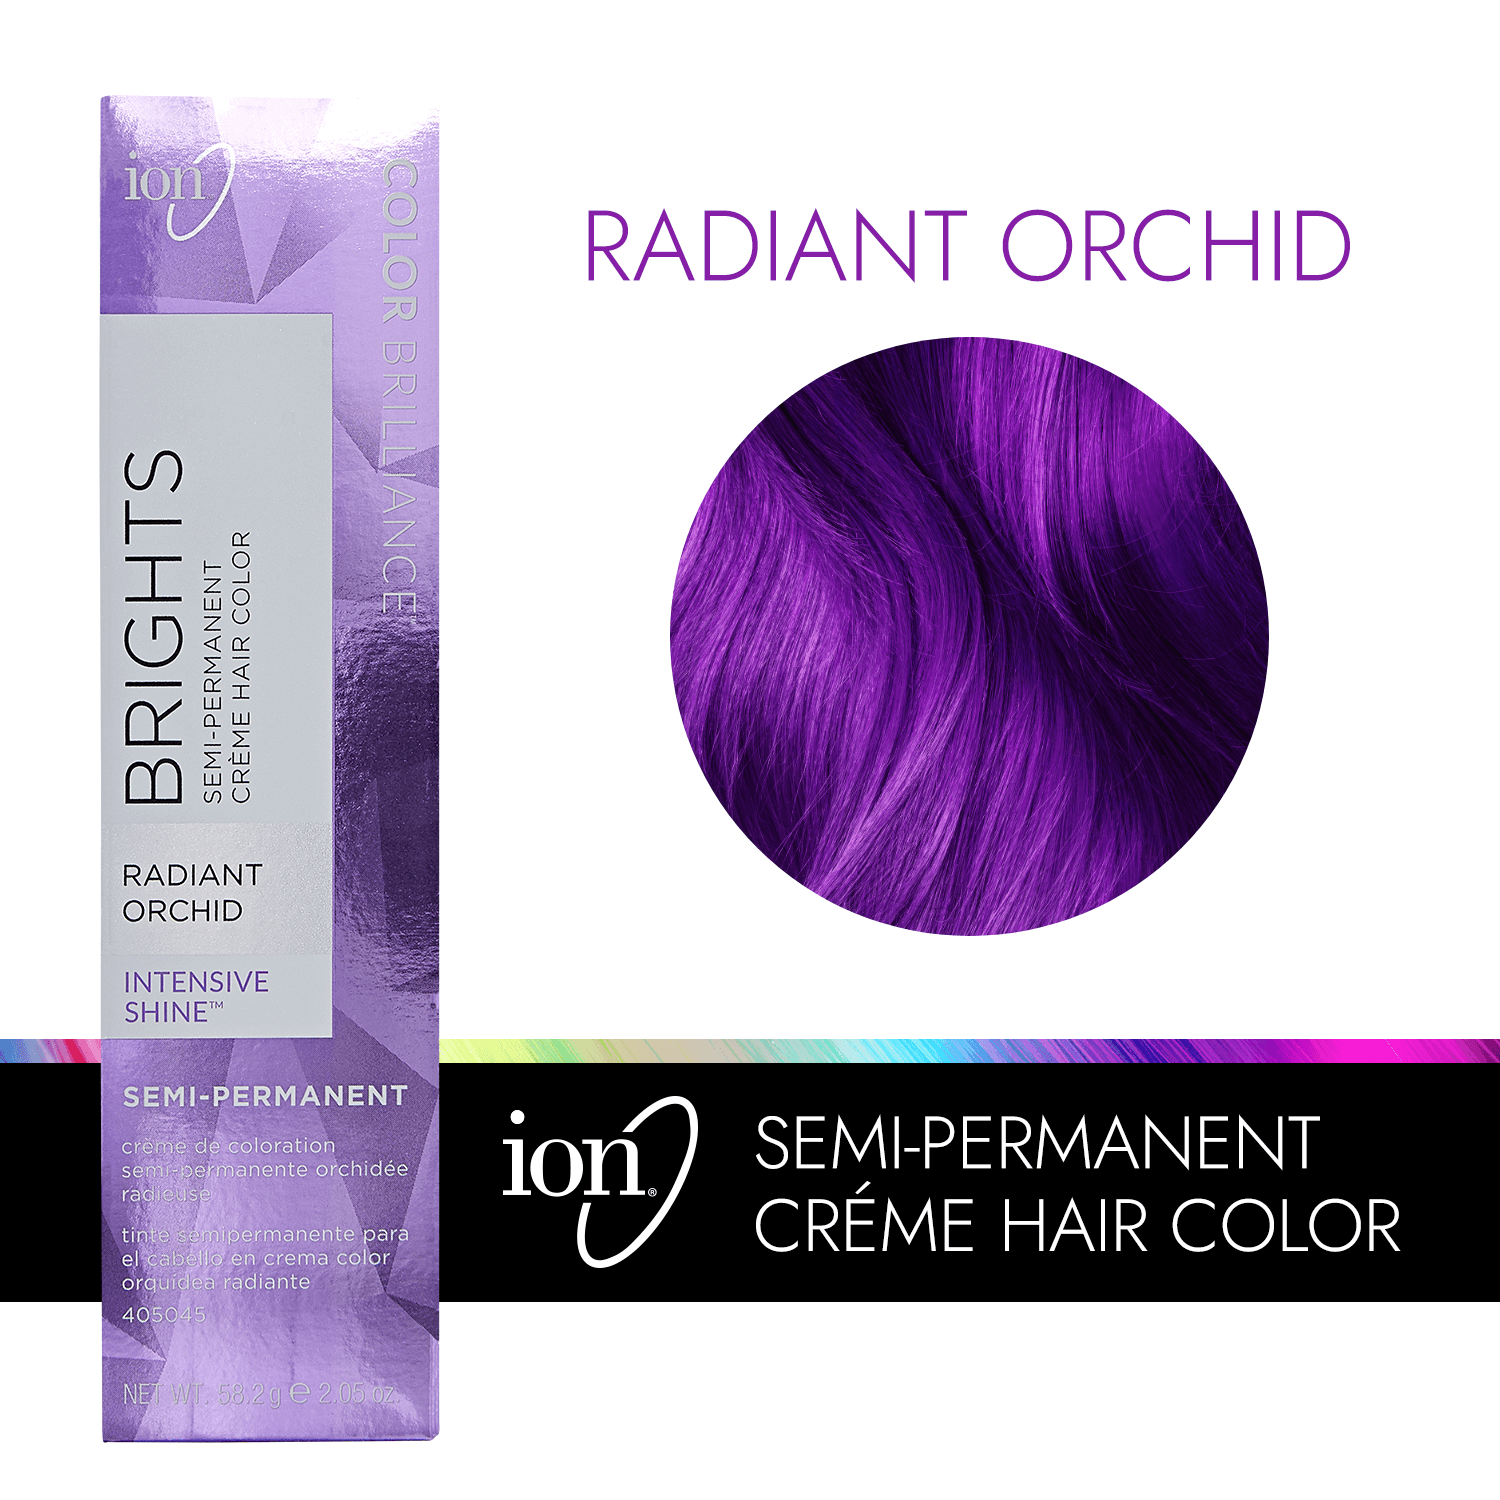 radiant orchid ion